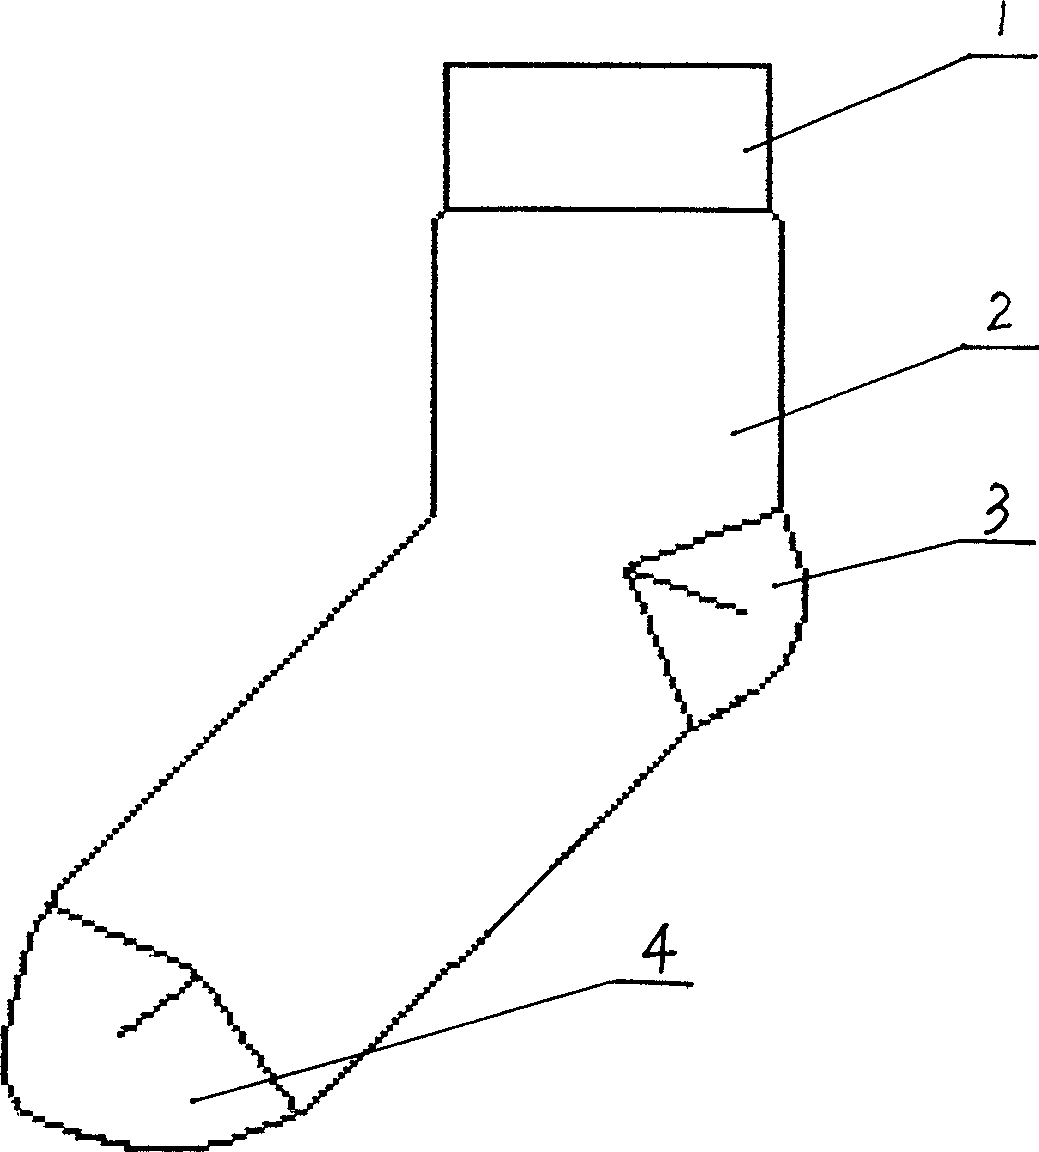 Super thin spring socks and producing method